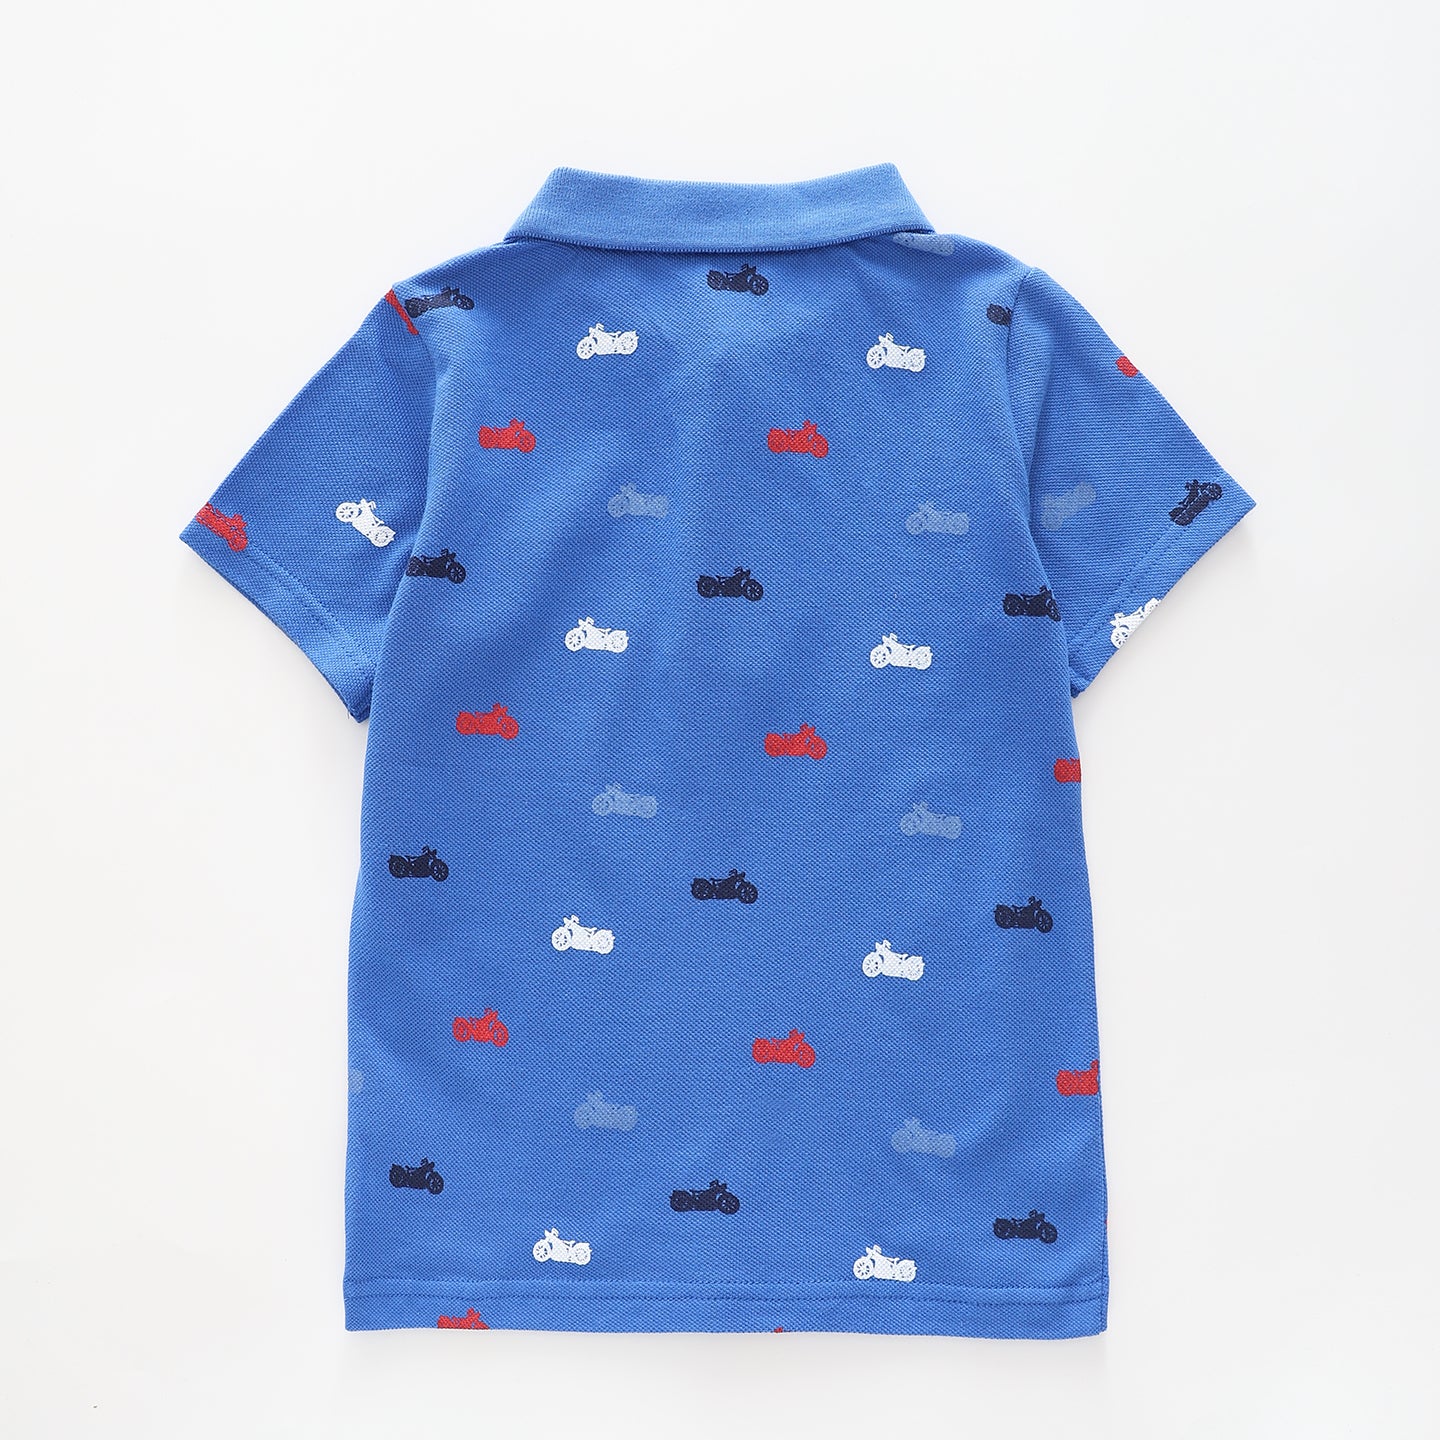 Boy's Royal Blue Polo Shirt With Motorcycle Print